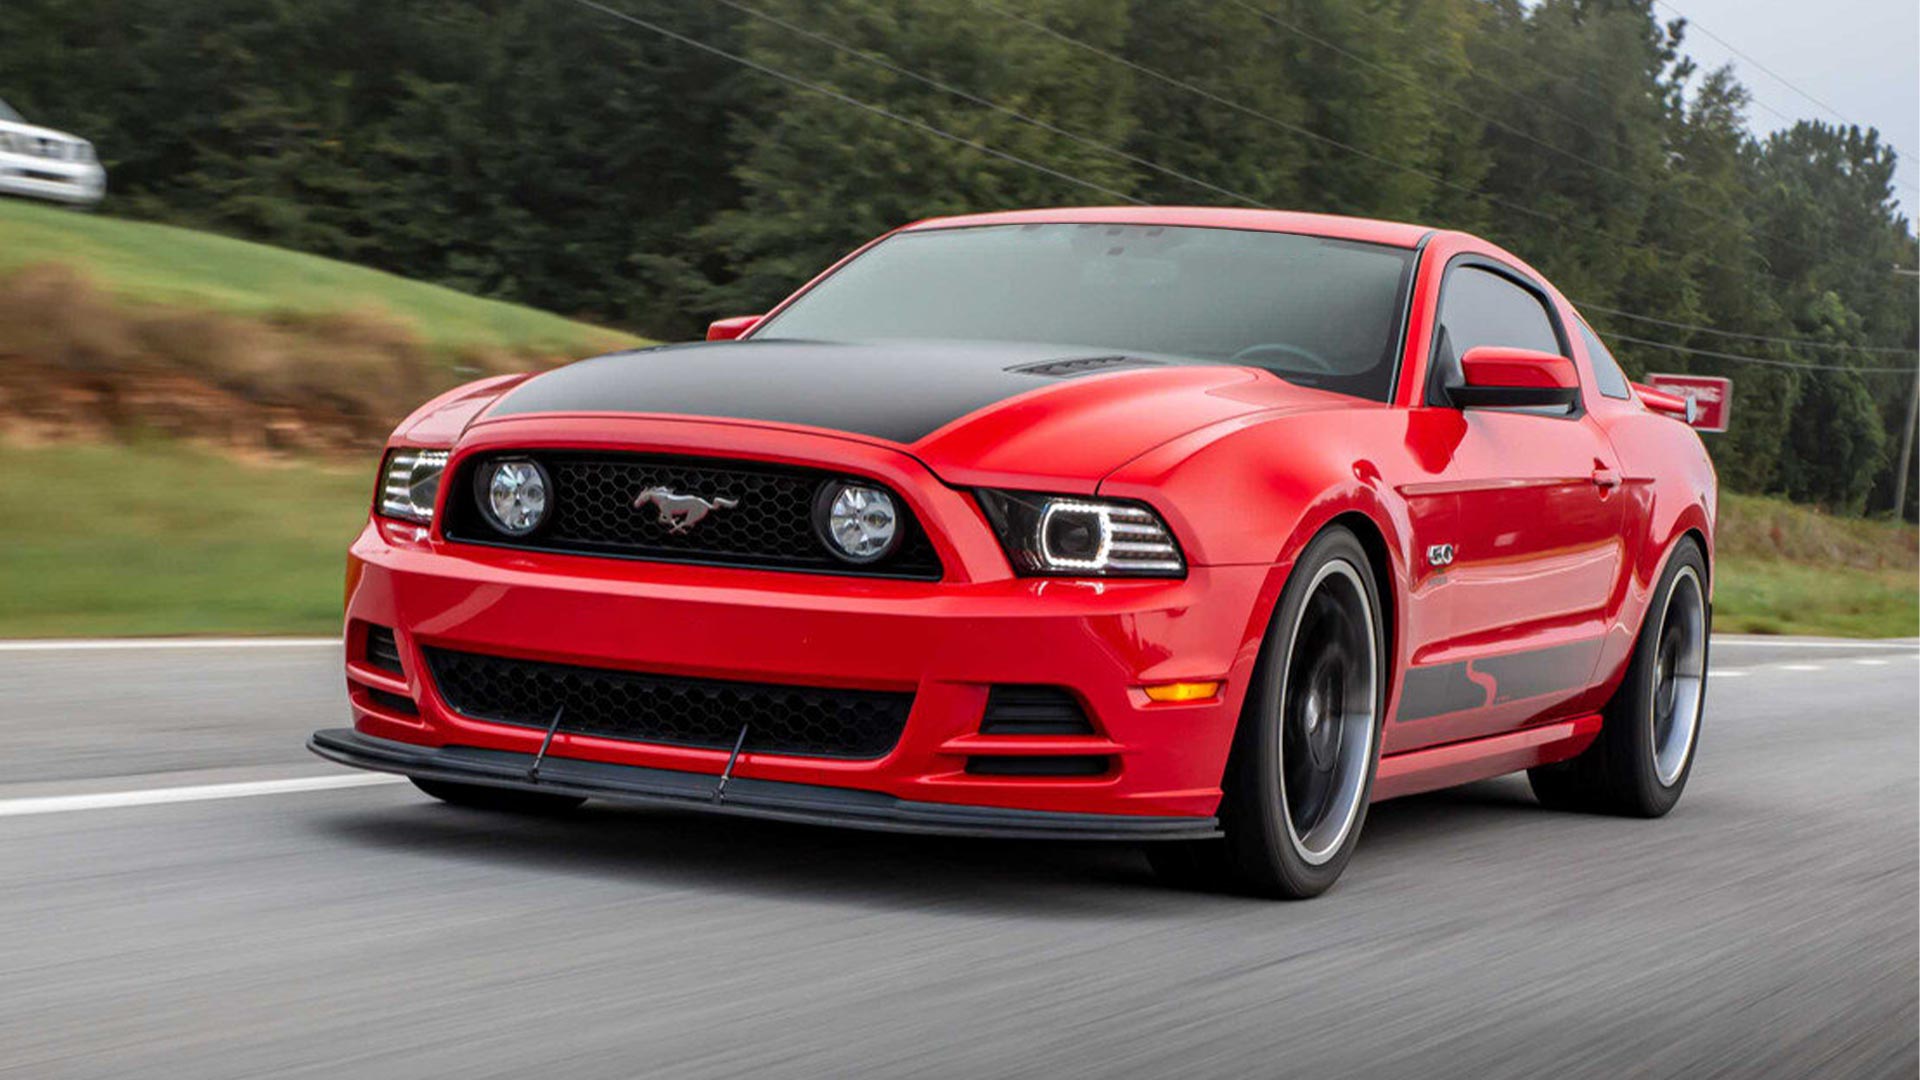 Image of a model year 2010 to 2014 Ford Mustang